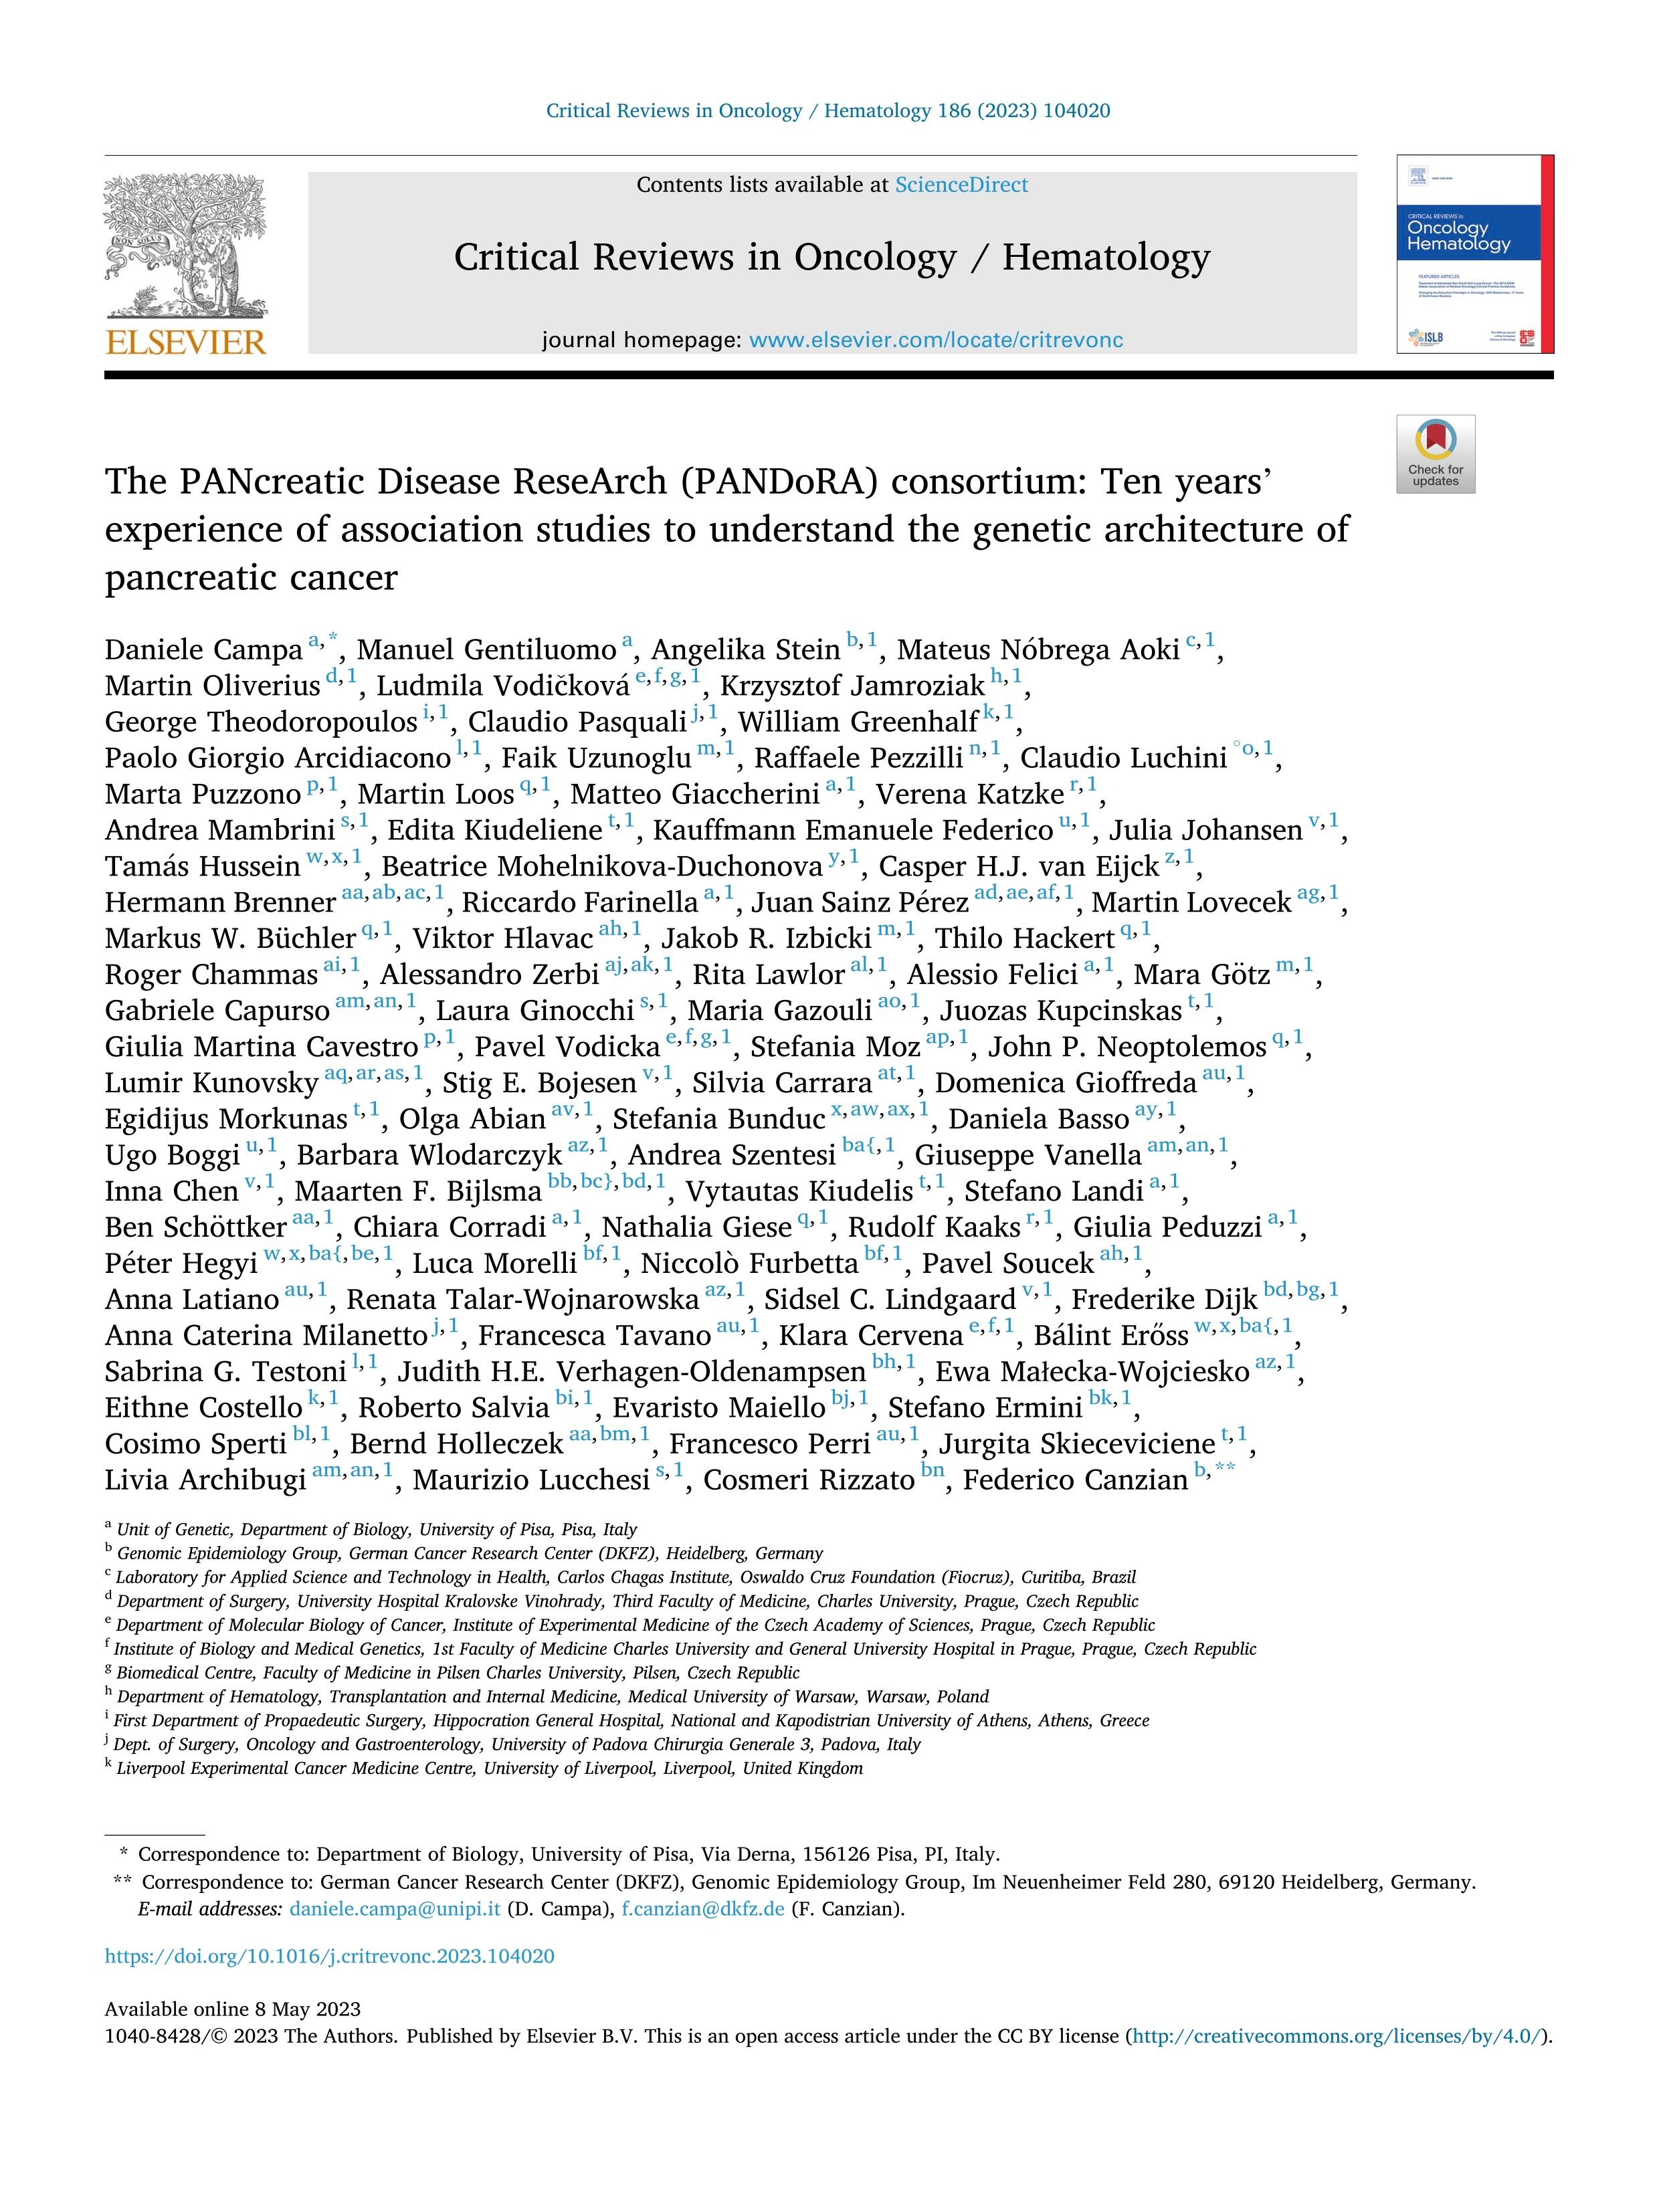 The PANcreatic Disease ReseArch (PANDoRA) consortium: Ten years’ experience of association studies to understand the genetic architecture of pancreatic cancer